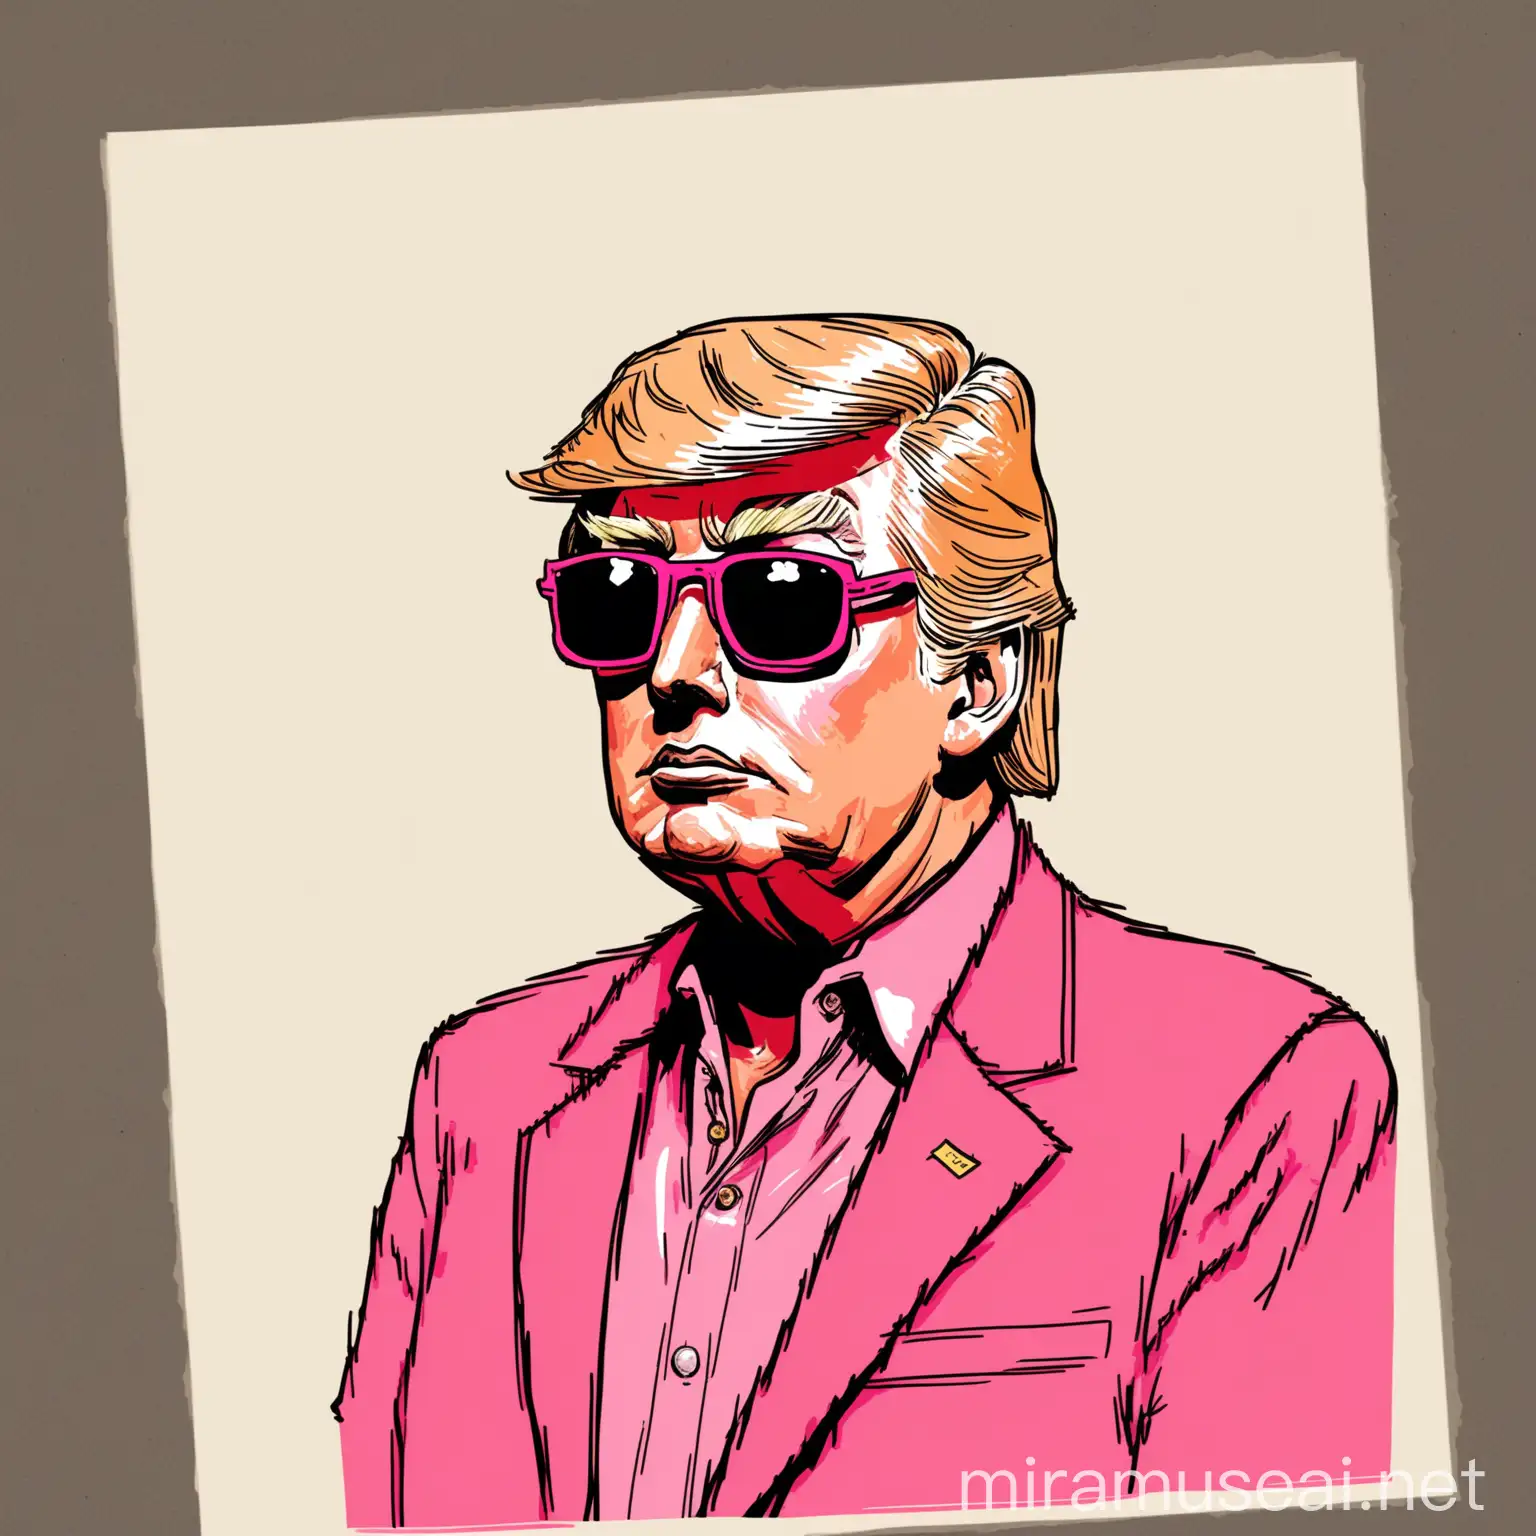 HandDrawn Illustration of Donald Trump in Pink Cowboy Attire and Sunglasses